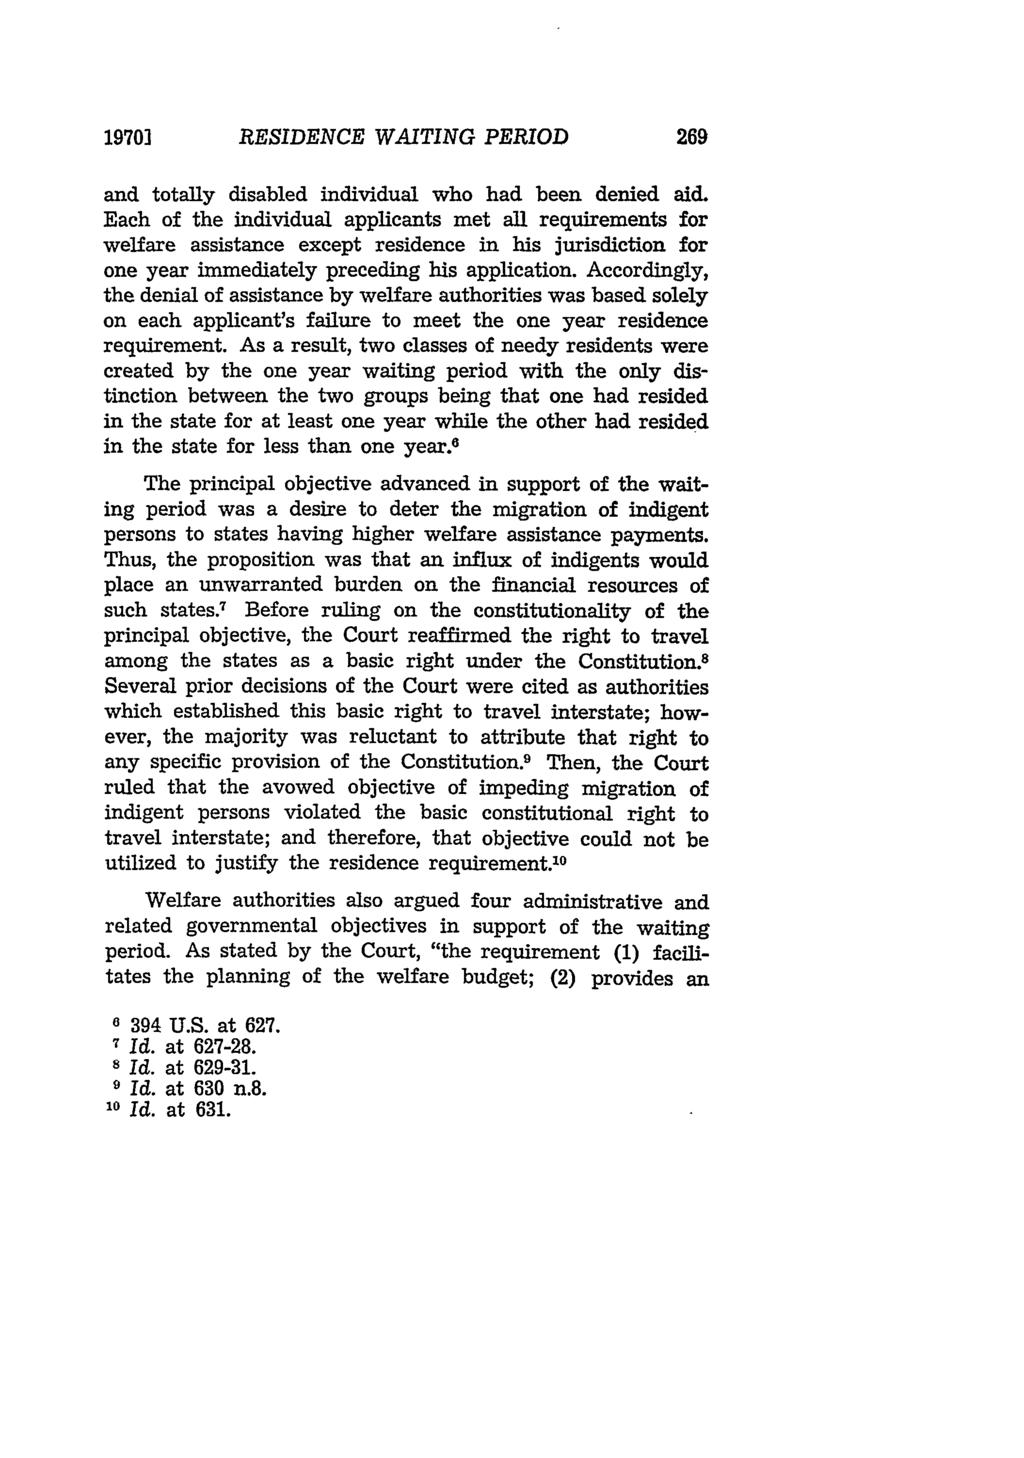 Tulsa Law Review, Vol. 6 [1969], Iss. 3, Art. 7 19701 RESIDENCE WAITING PERIOD and totally disabled individual who had been denied aid.